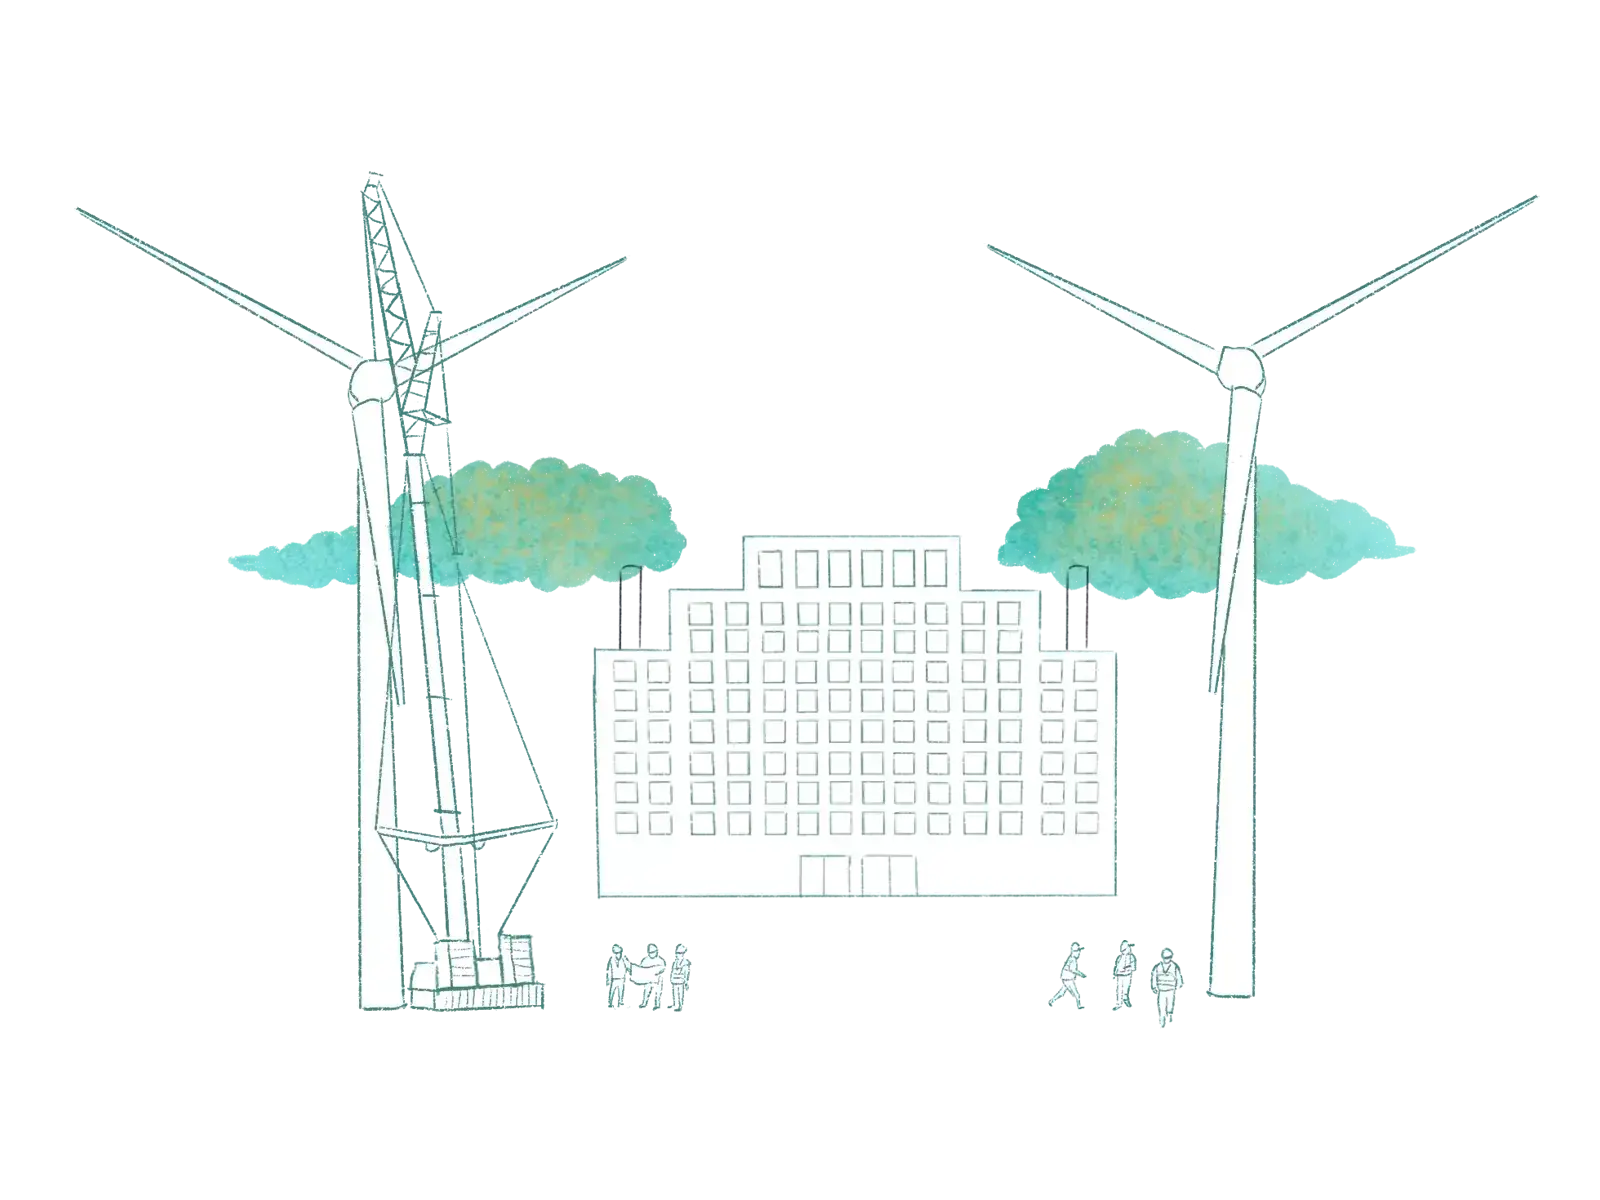 Renewable wind energy powers existing factories and sites of production